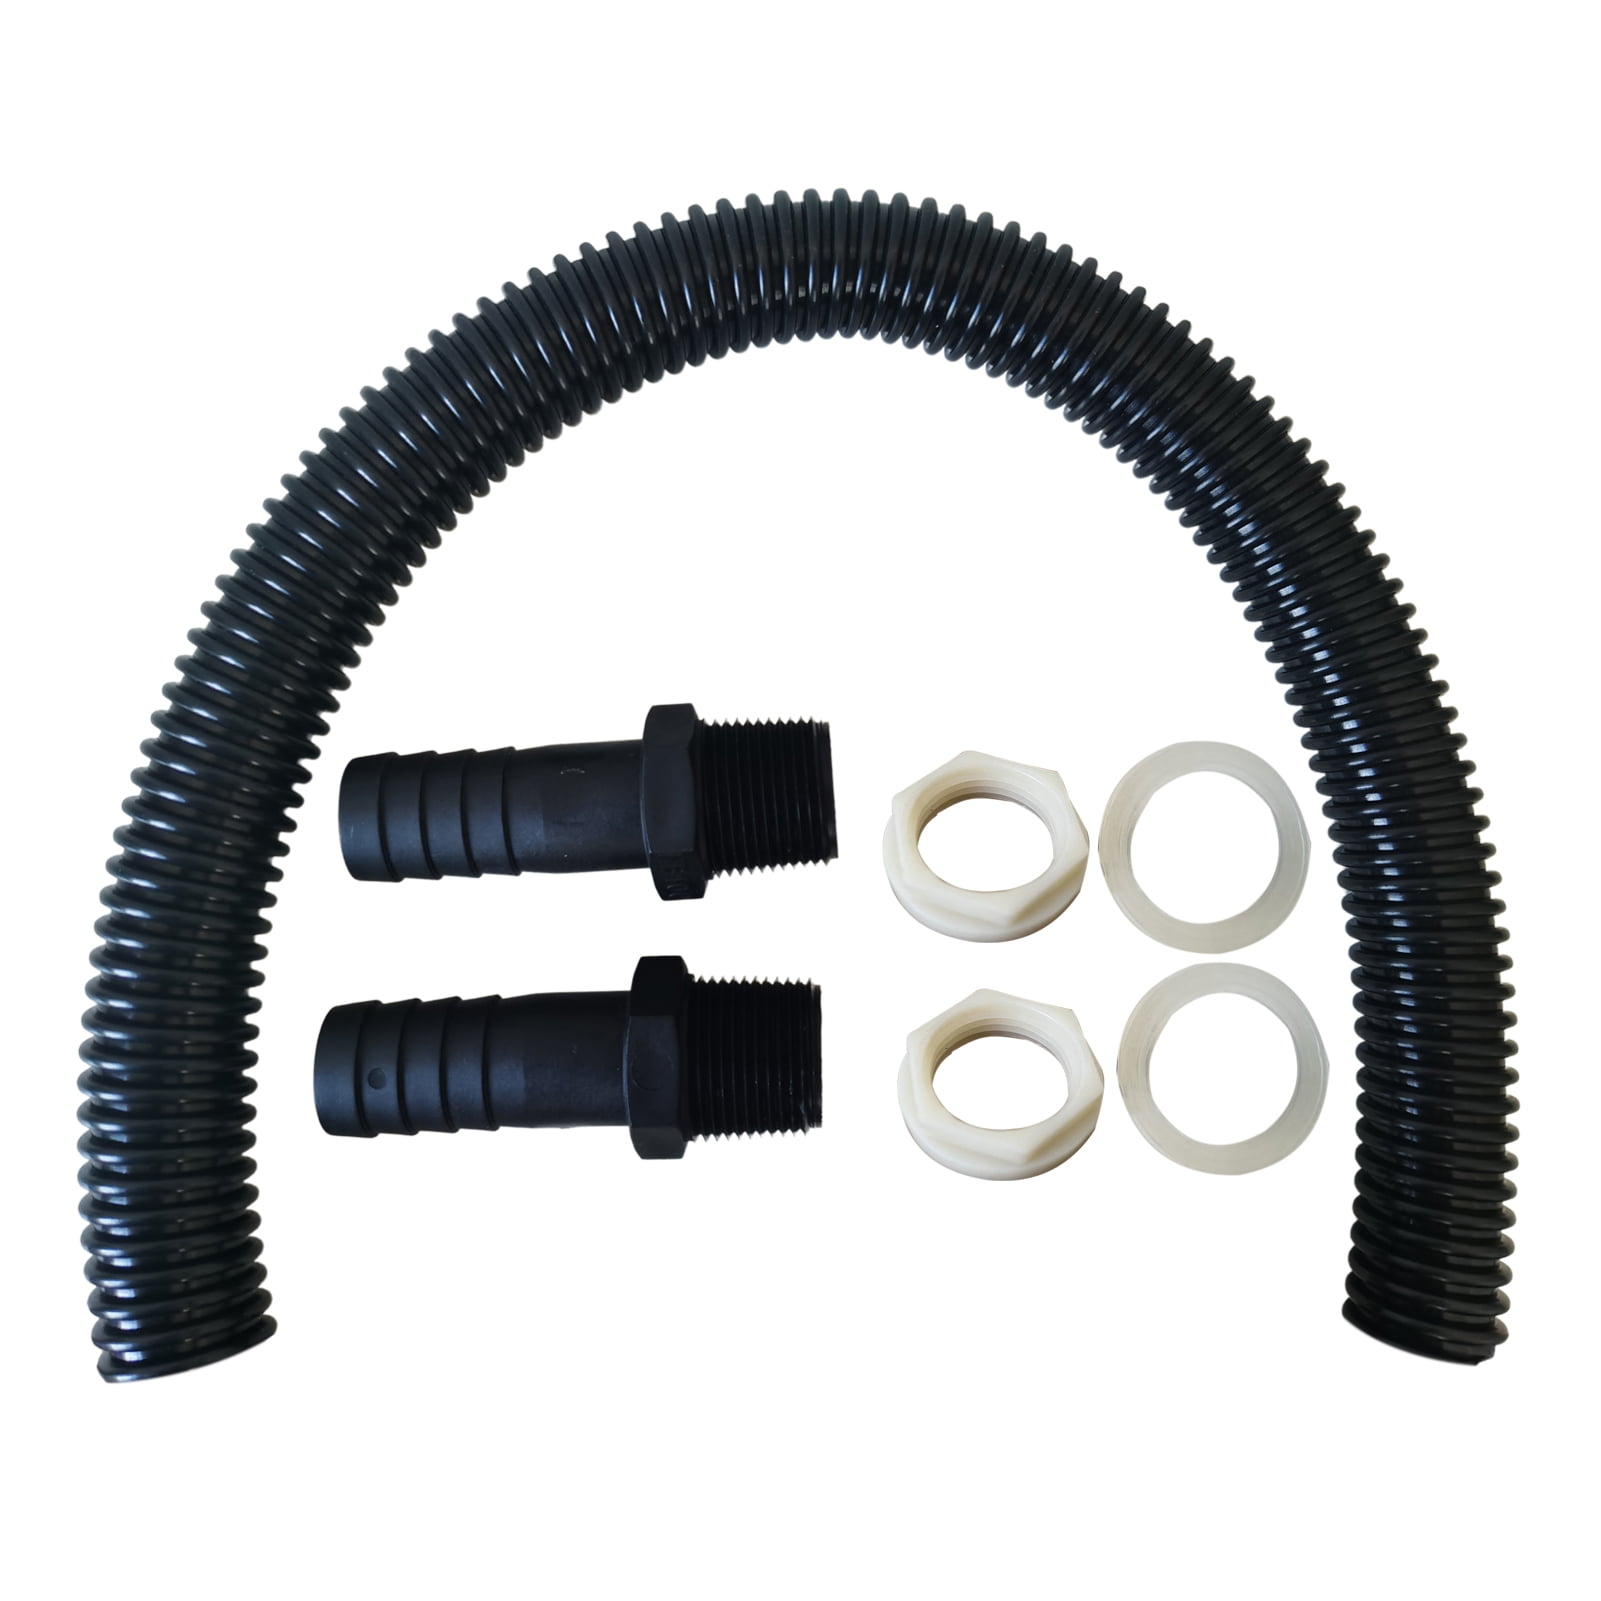 RIBBED HOSE 1" 25mm FOR PUMPS WATERFALLS FILTERS POND WATER FEATURES 